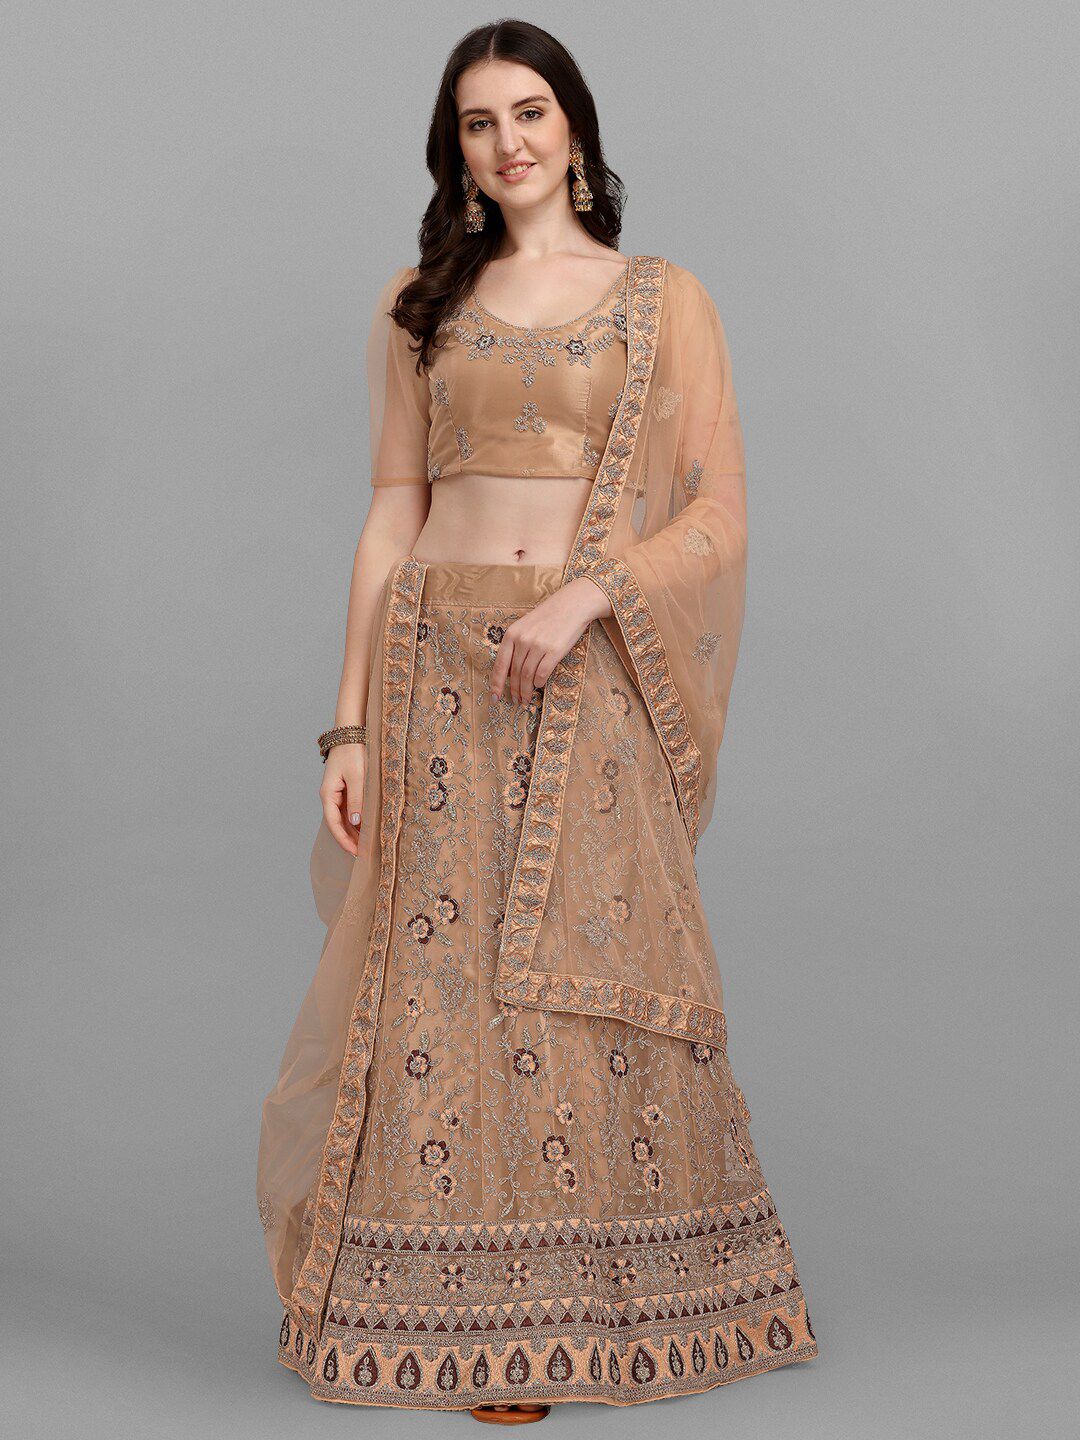 V SALES Beige Embroidered Zari Work Semi-Stitched Lehenga & Unstitched Blouse With Dupatta Price in India